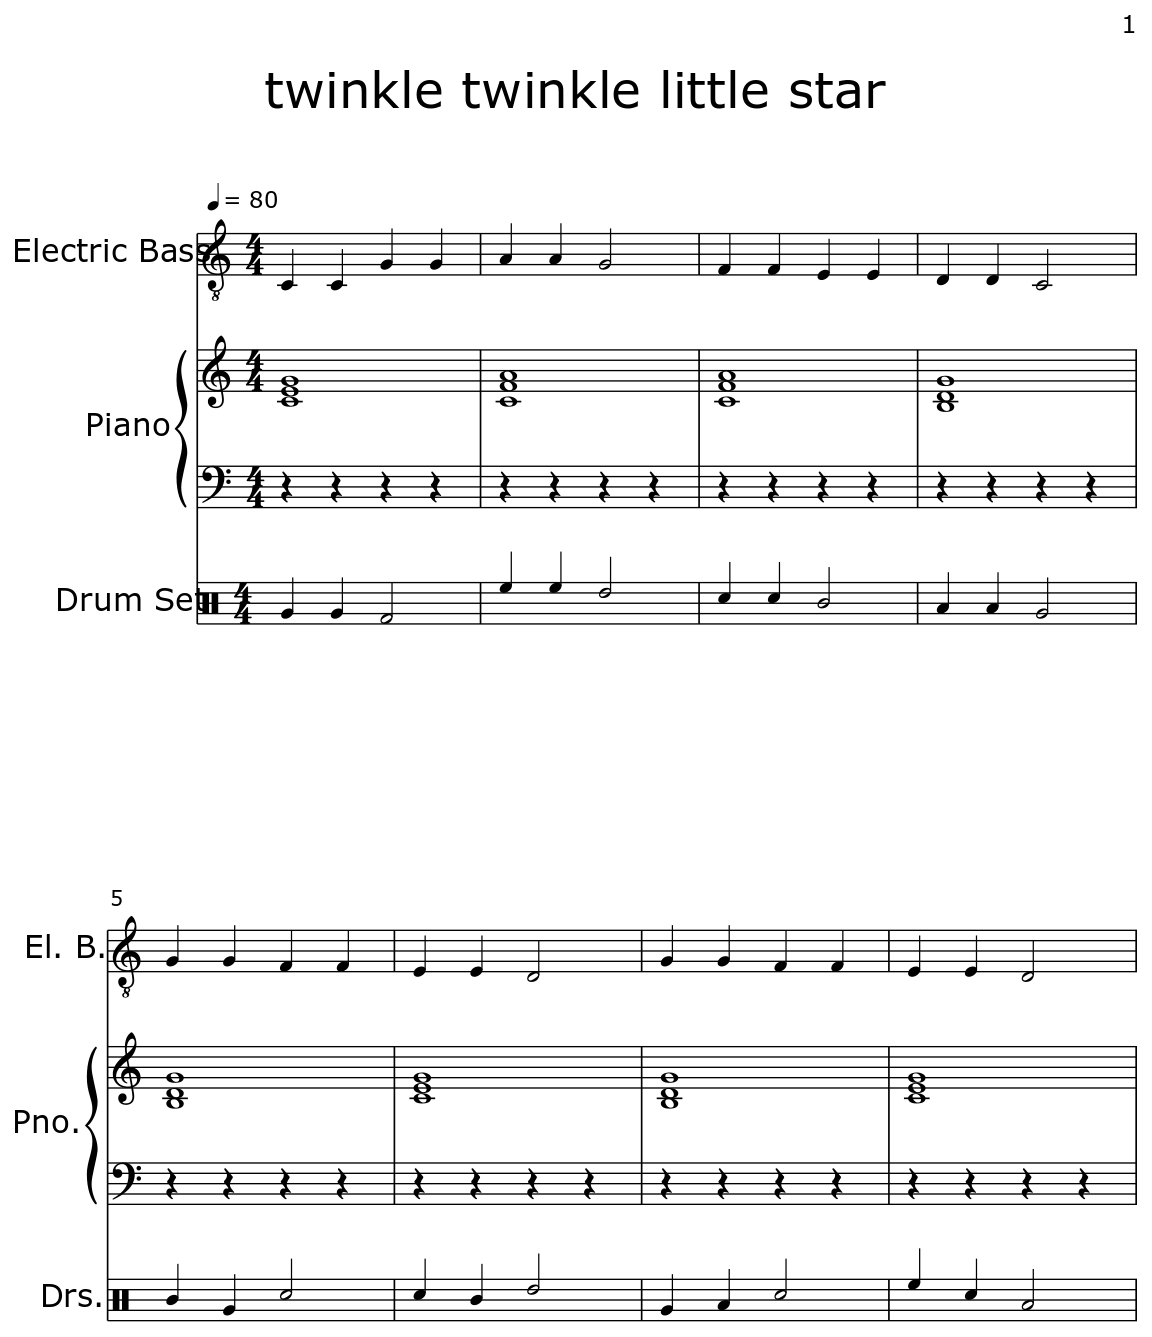 Twinkle Twinkle Little Star Sheet Music For Electric Bass Piano Drum Set